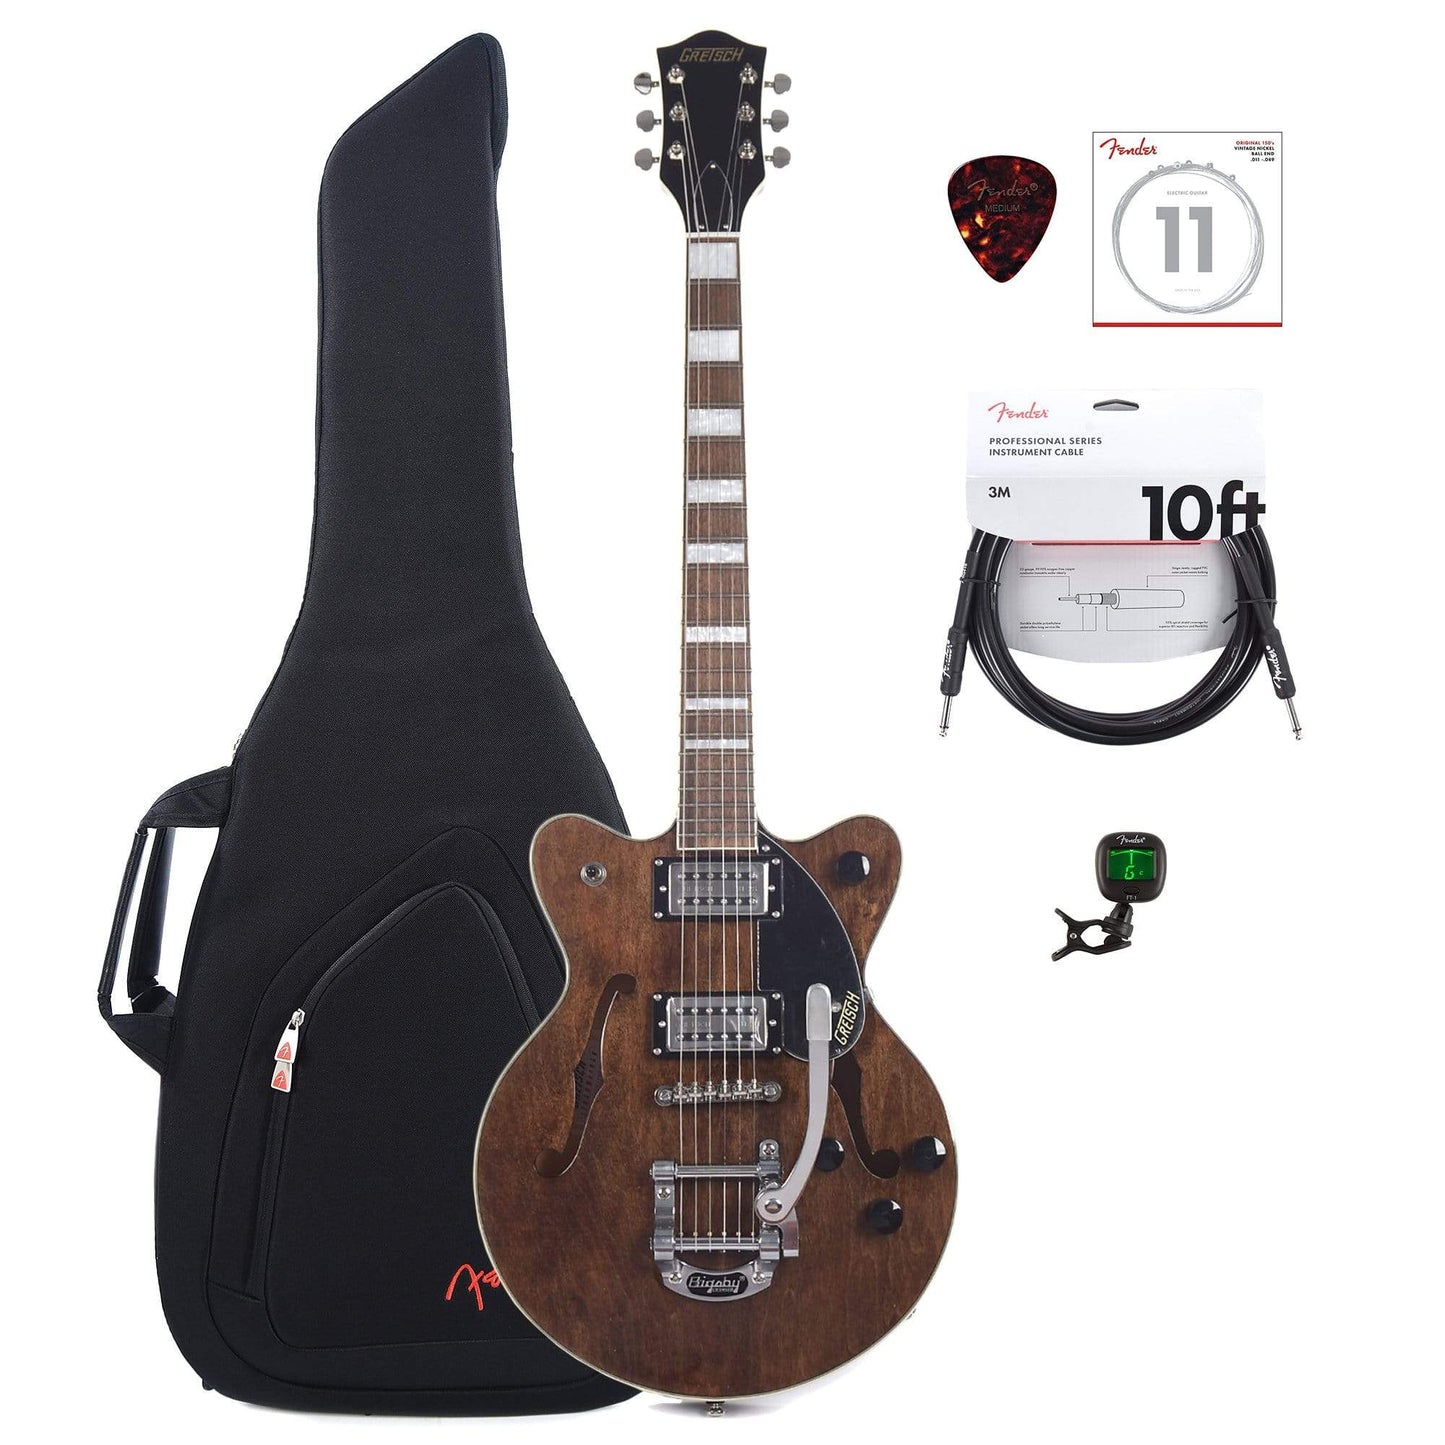 Gretsch G2655T Streamliner Center Block Jr. Imperial Stain w/Bigsby & Broad'Tron Pickups w/Gig Bag, Tuner, (1) Cable, Picks and Strings Bundle Electric Guitars / Semi-Hollow